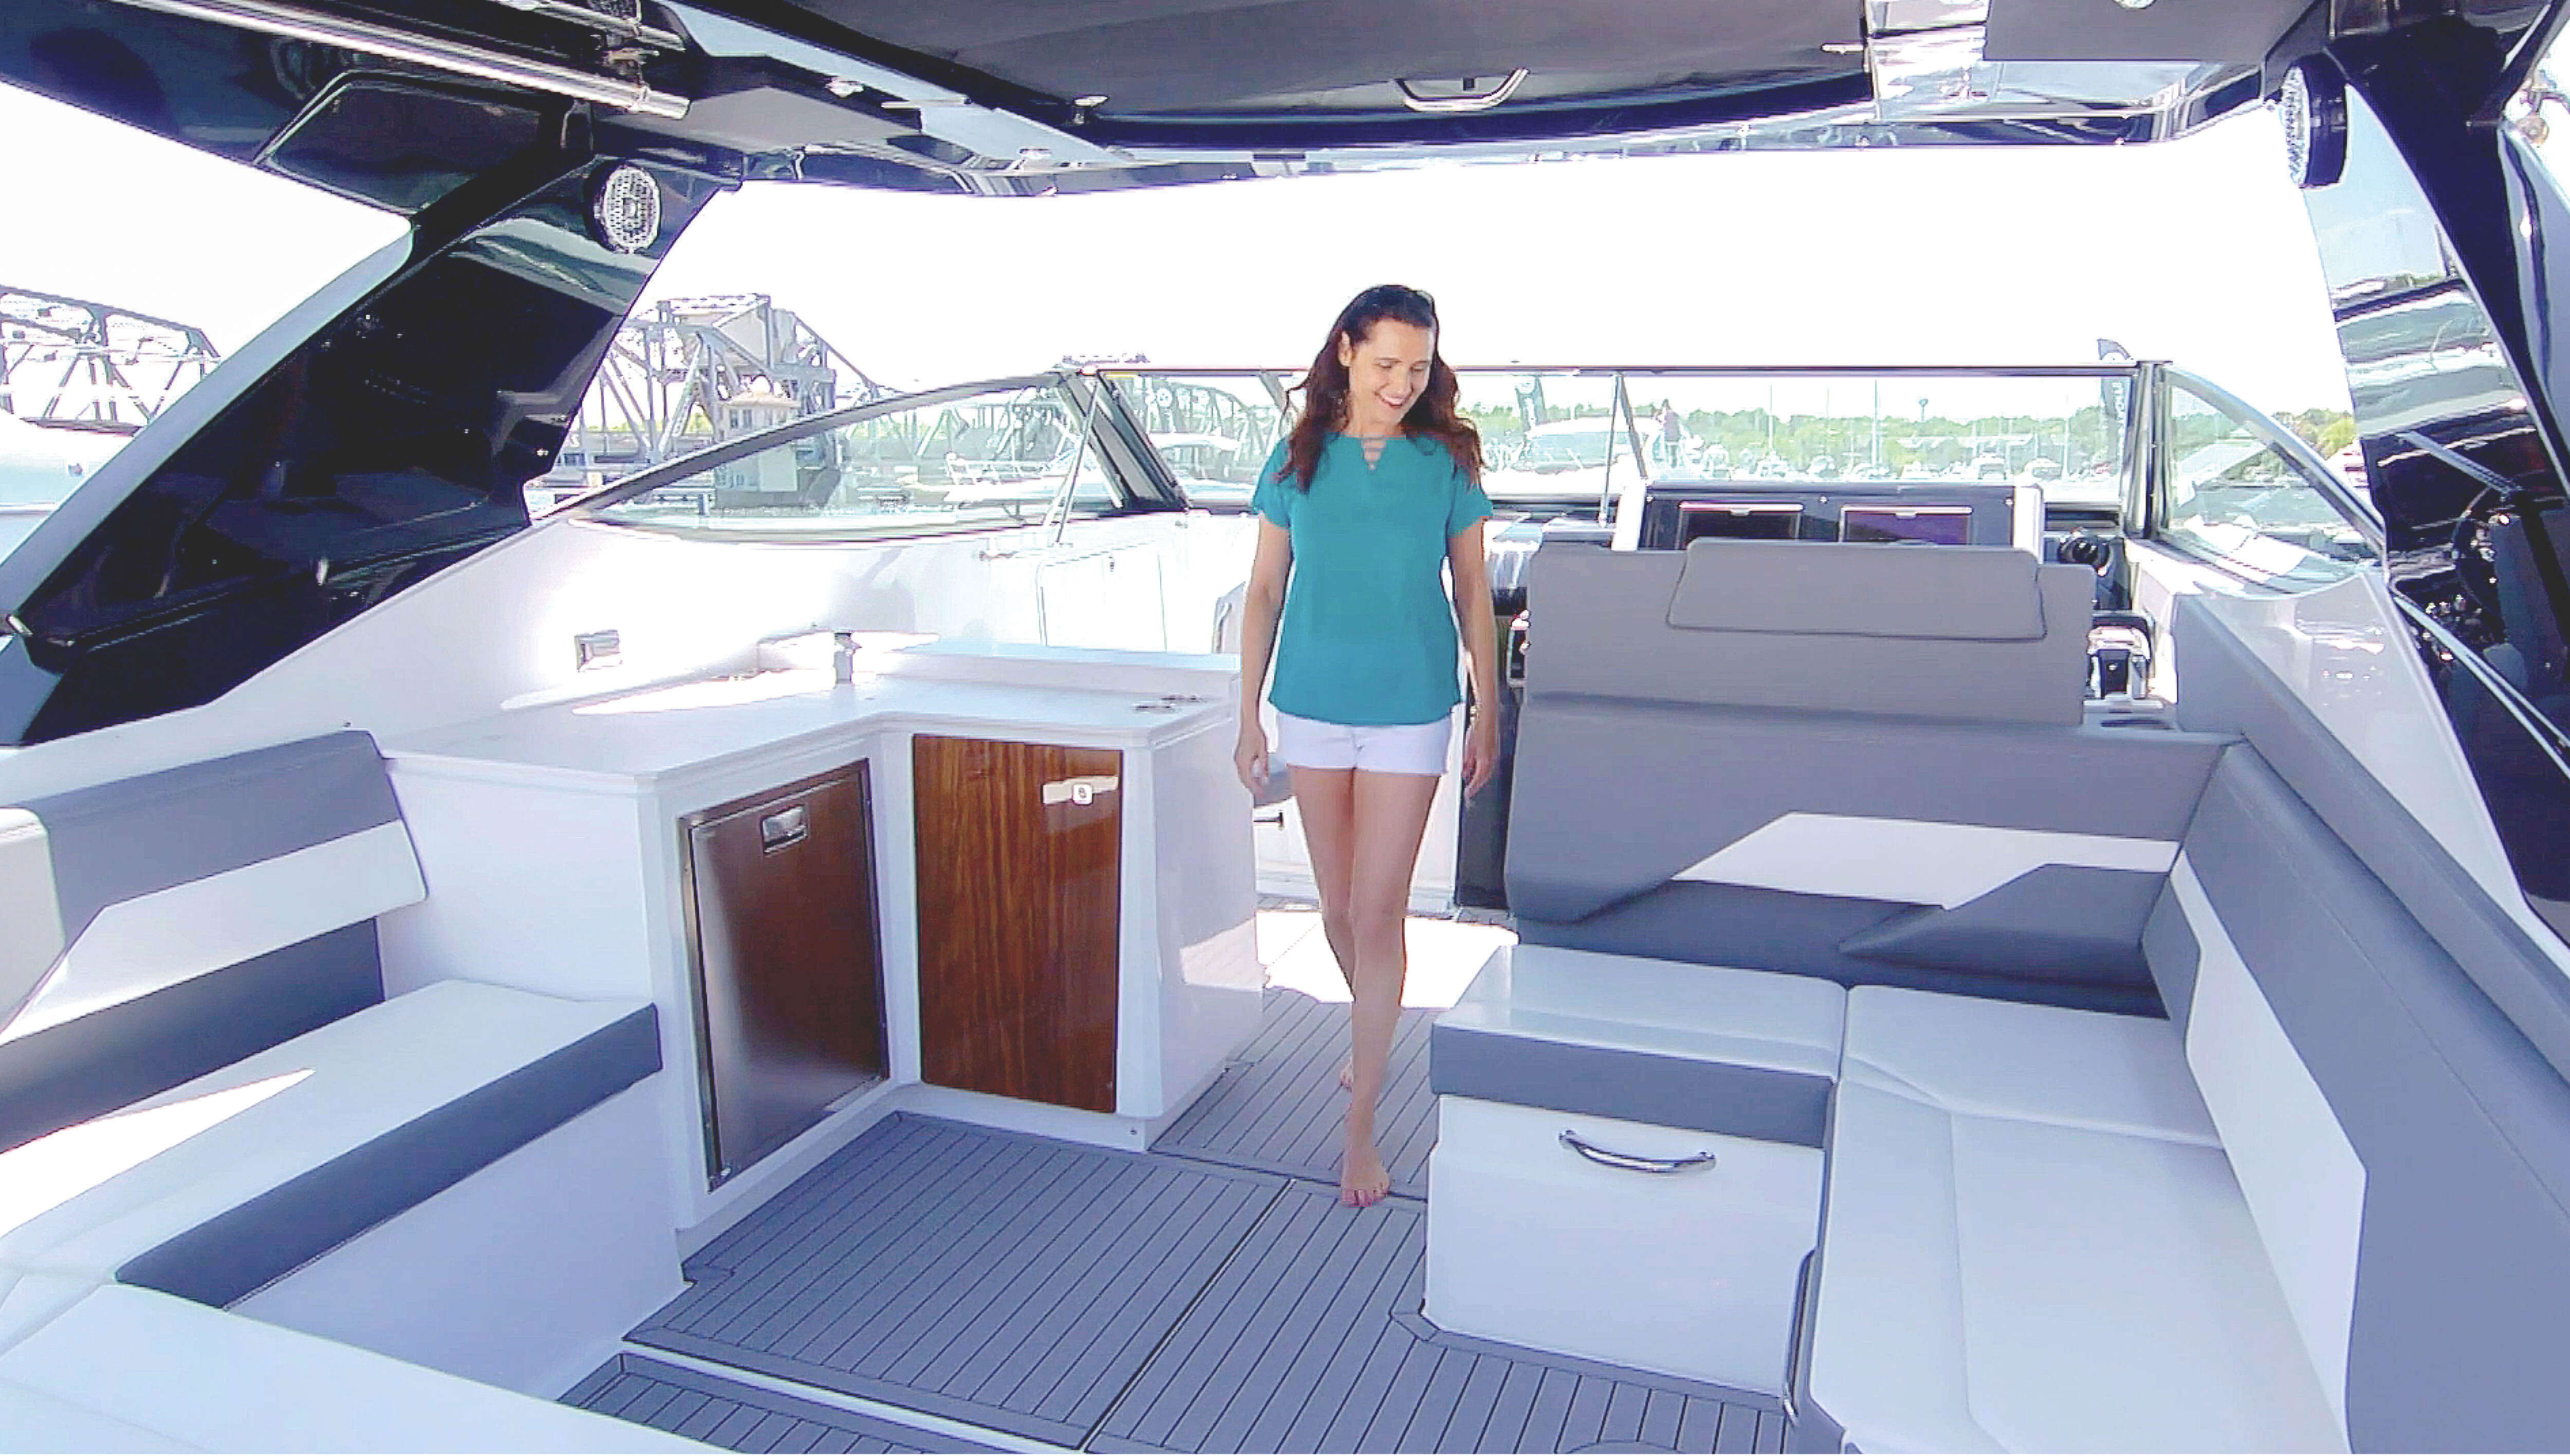 Woman standing in cockpit of Cruisers Yachts 38 GLS OB